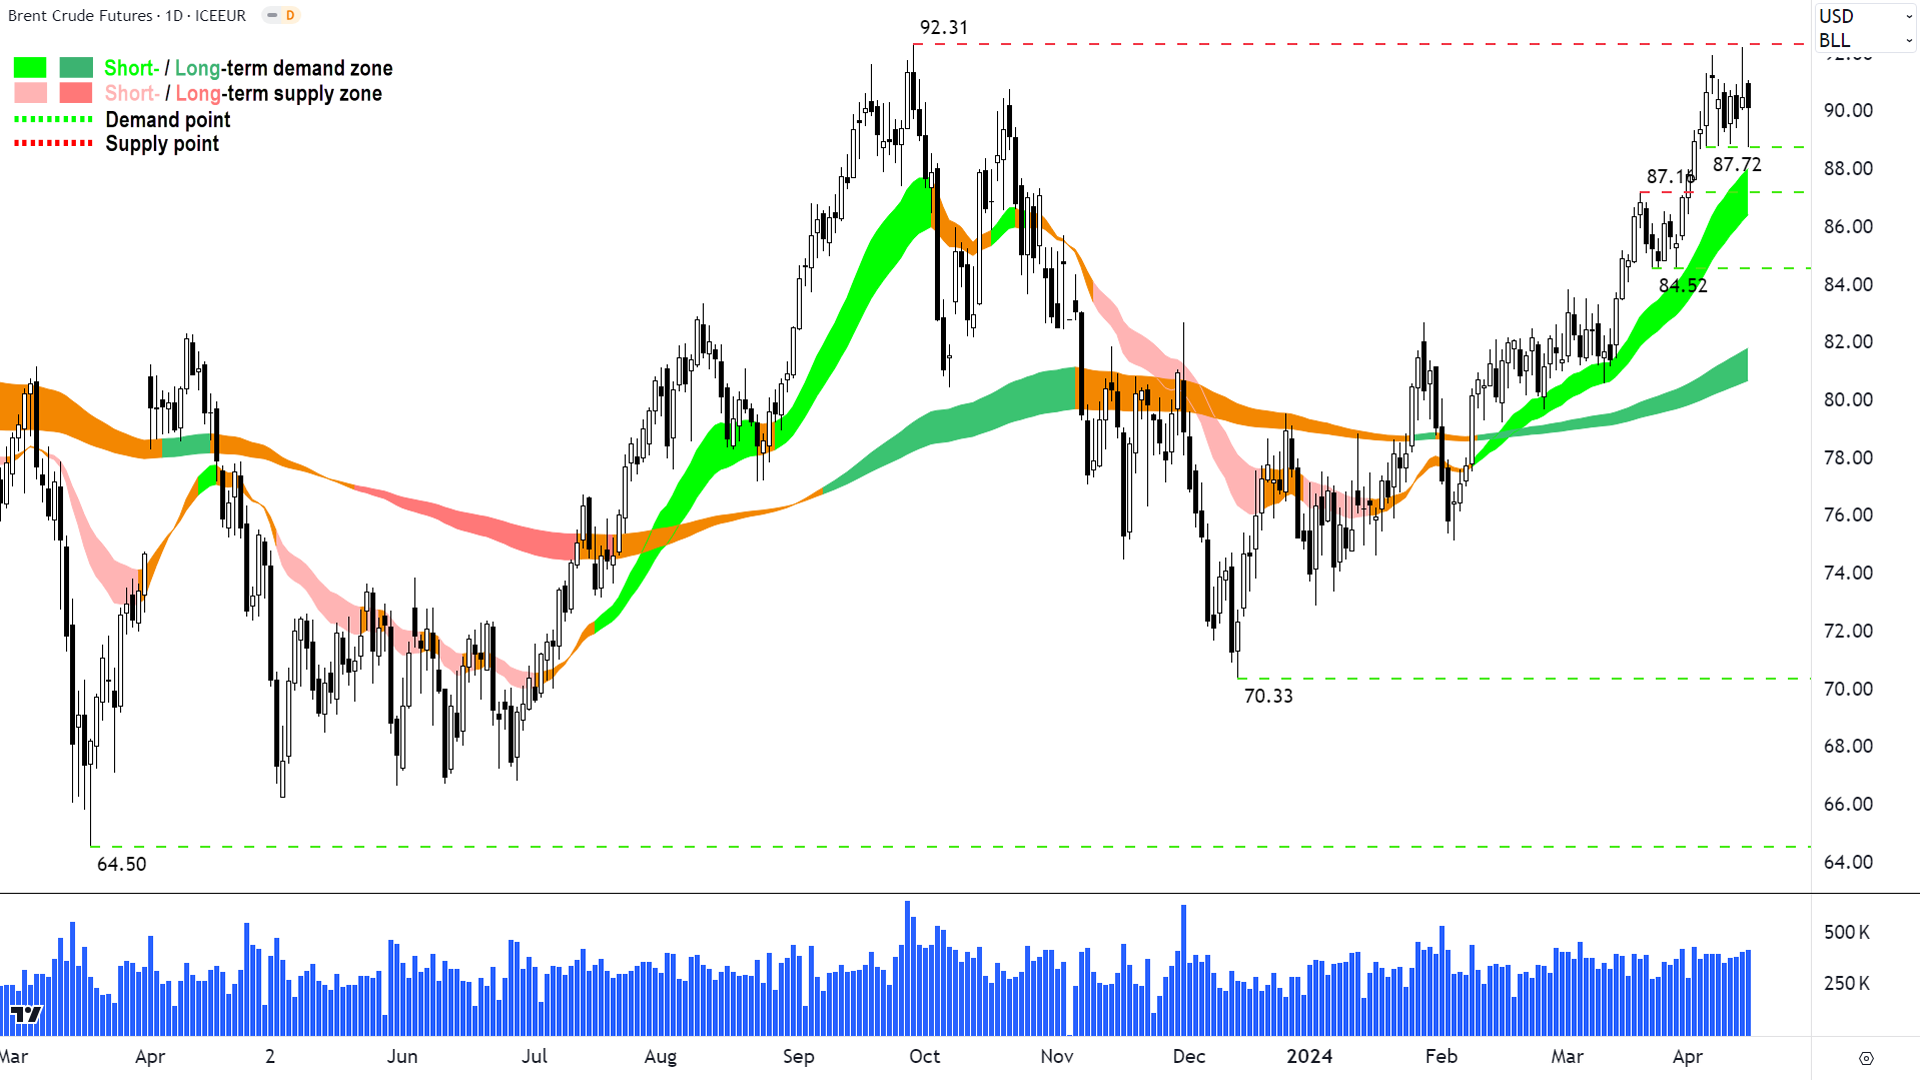 Brent crude oil price, daily chart. Source: TradingView